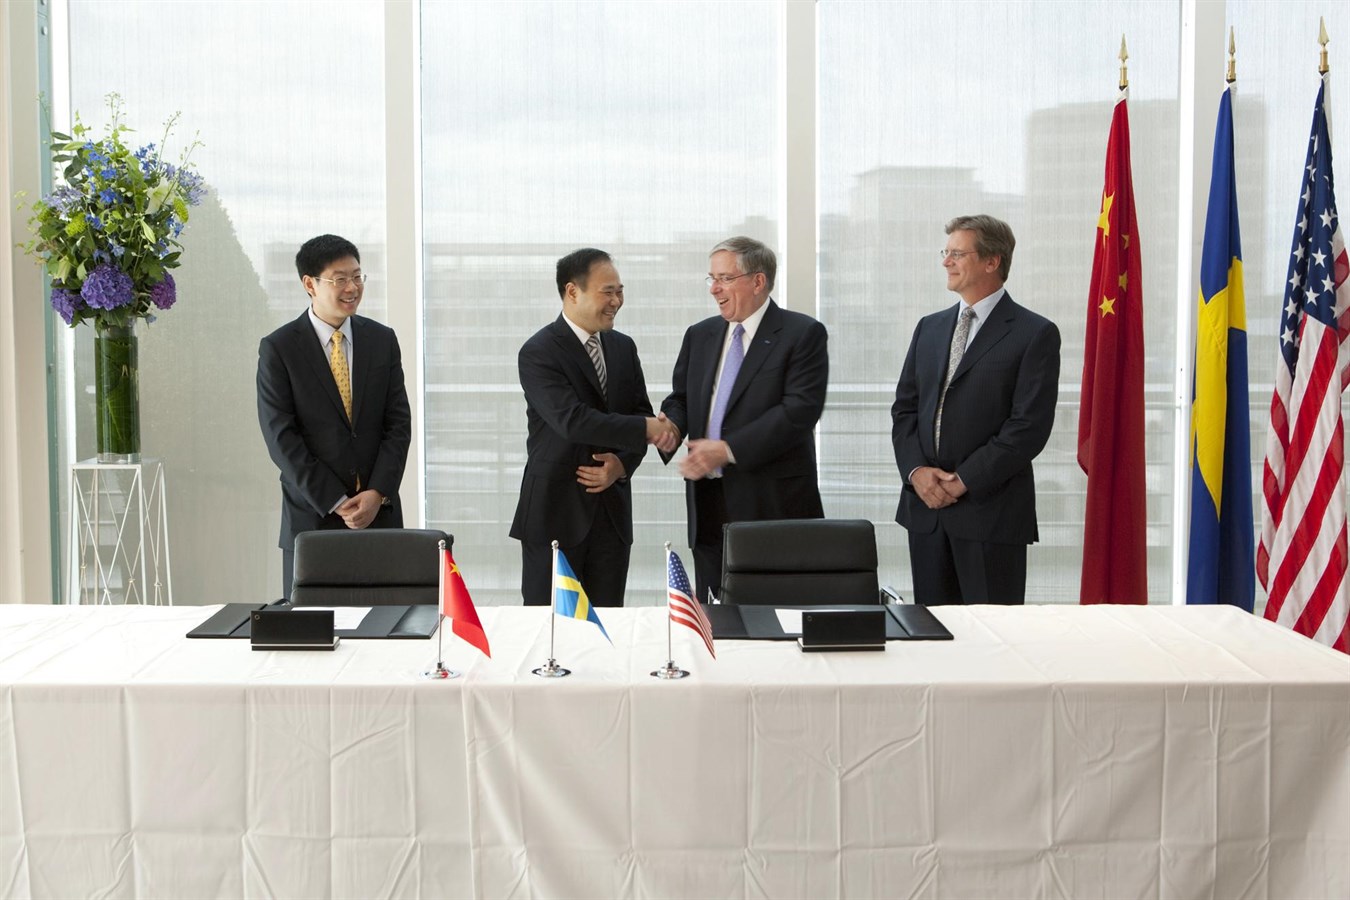 Completion of the sale of Volvo Car Corporation to Zhejiang Geely, August 2 2010